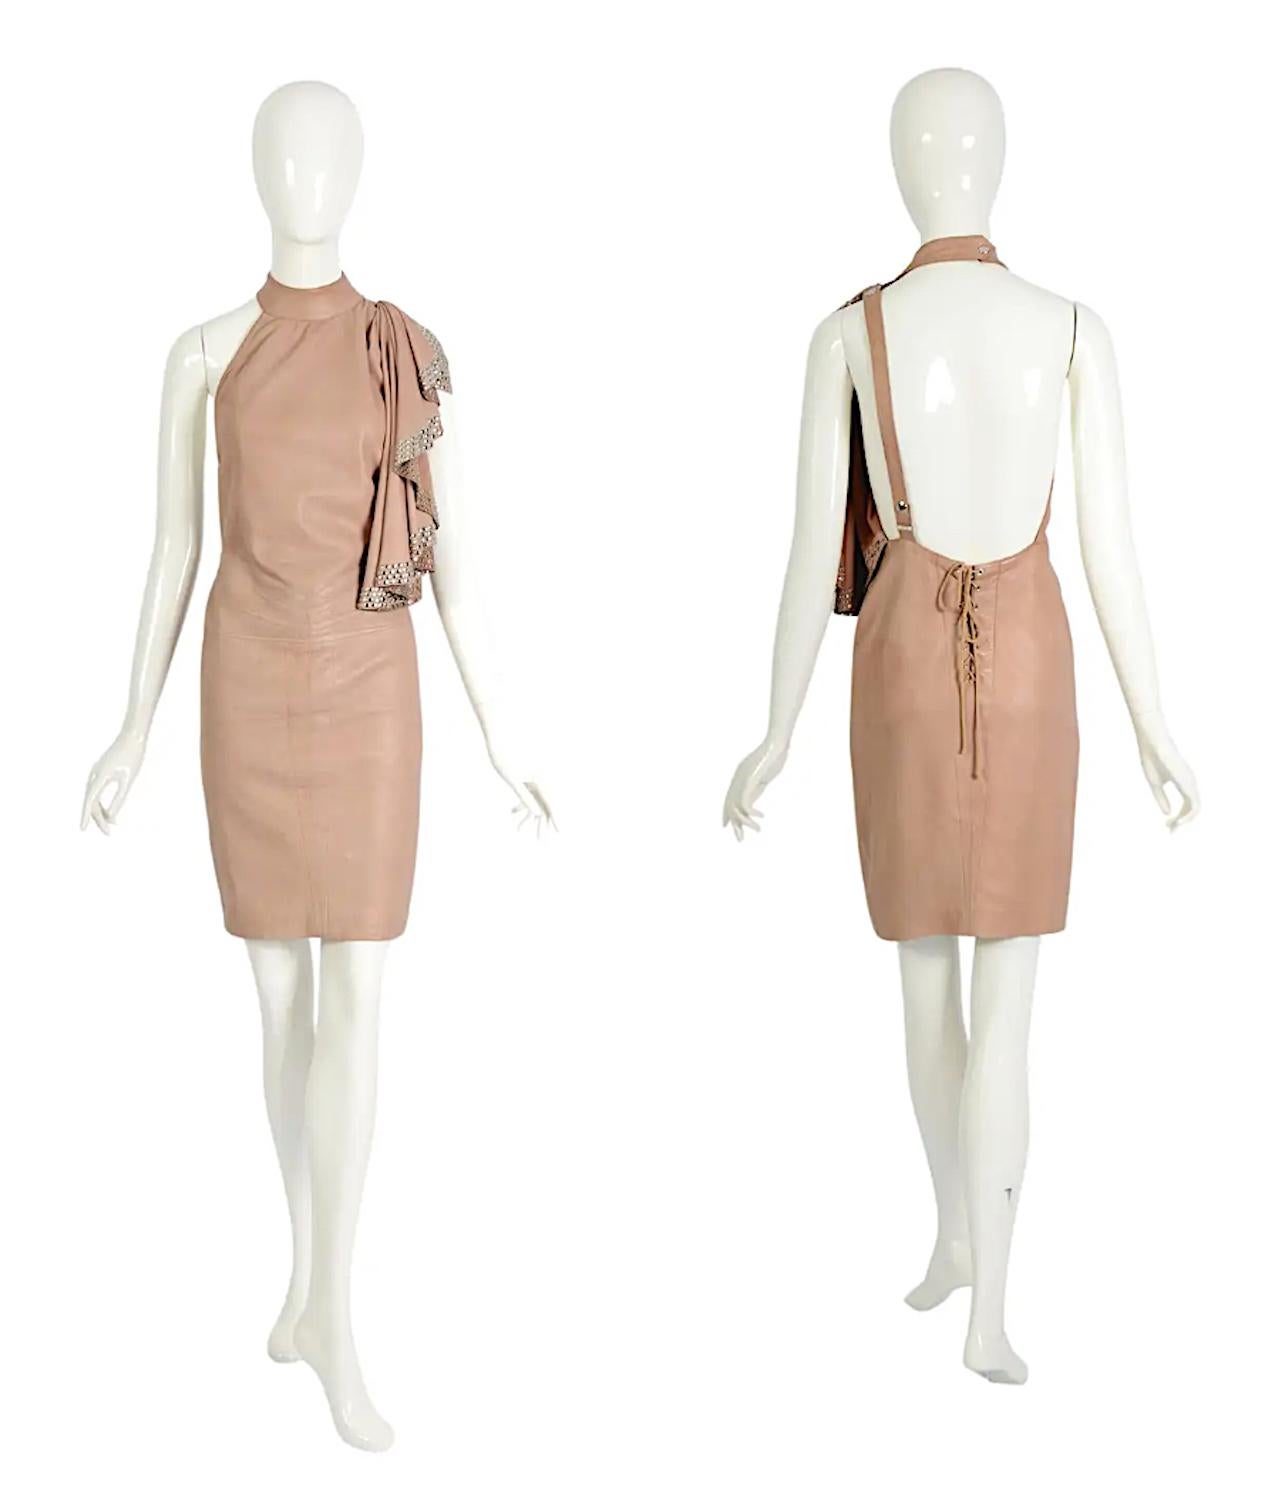 Introducing an exquisite piece of fashion history: the iconic Azzedine Alaïa nude soft leather dress from the Spring-Summer 1981 collection.
Crafted with meticulous attention to detail, this museum-grade garment is a testament to Alaïa's